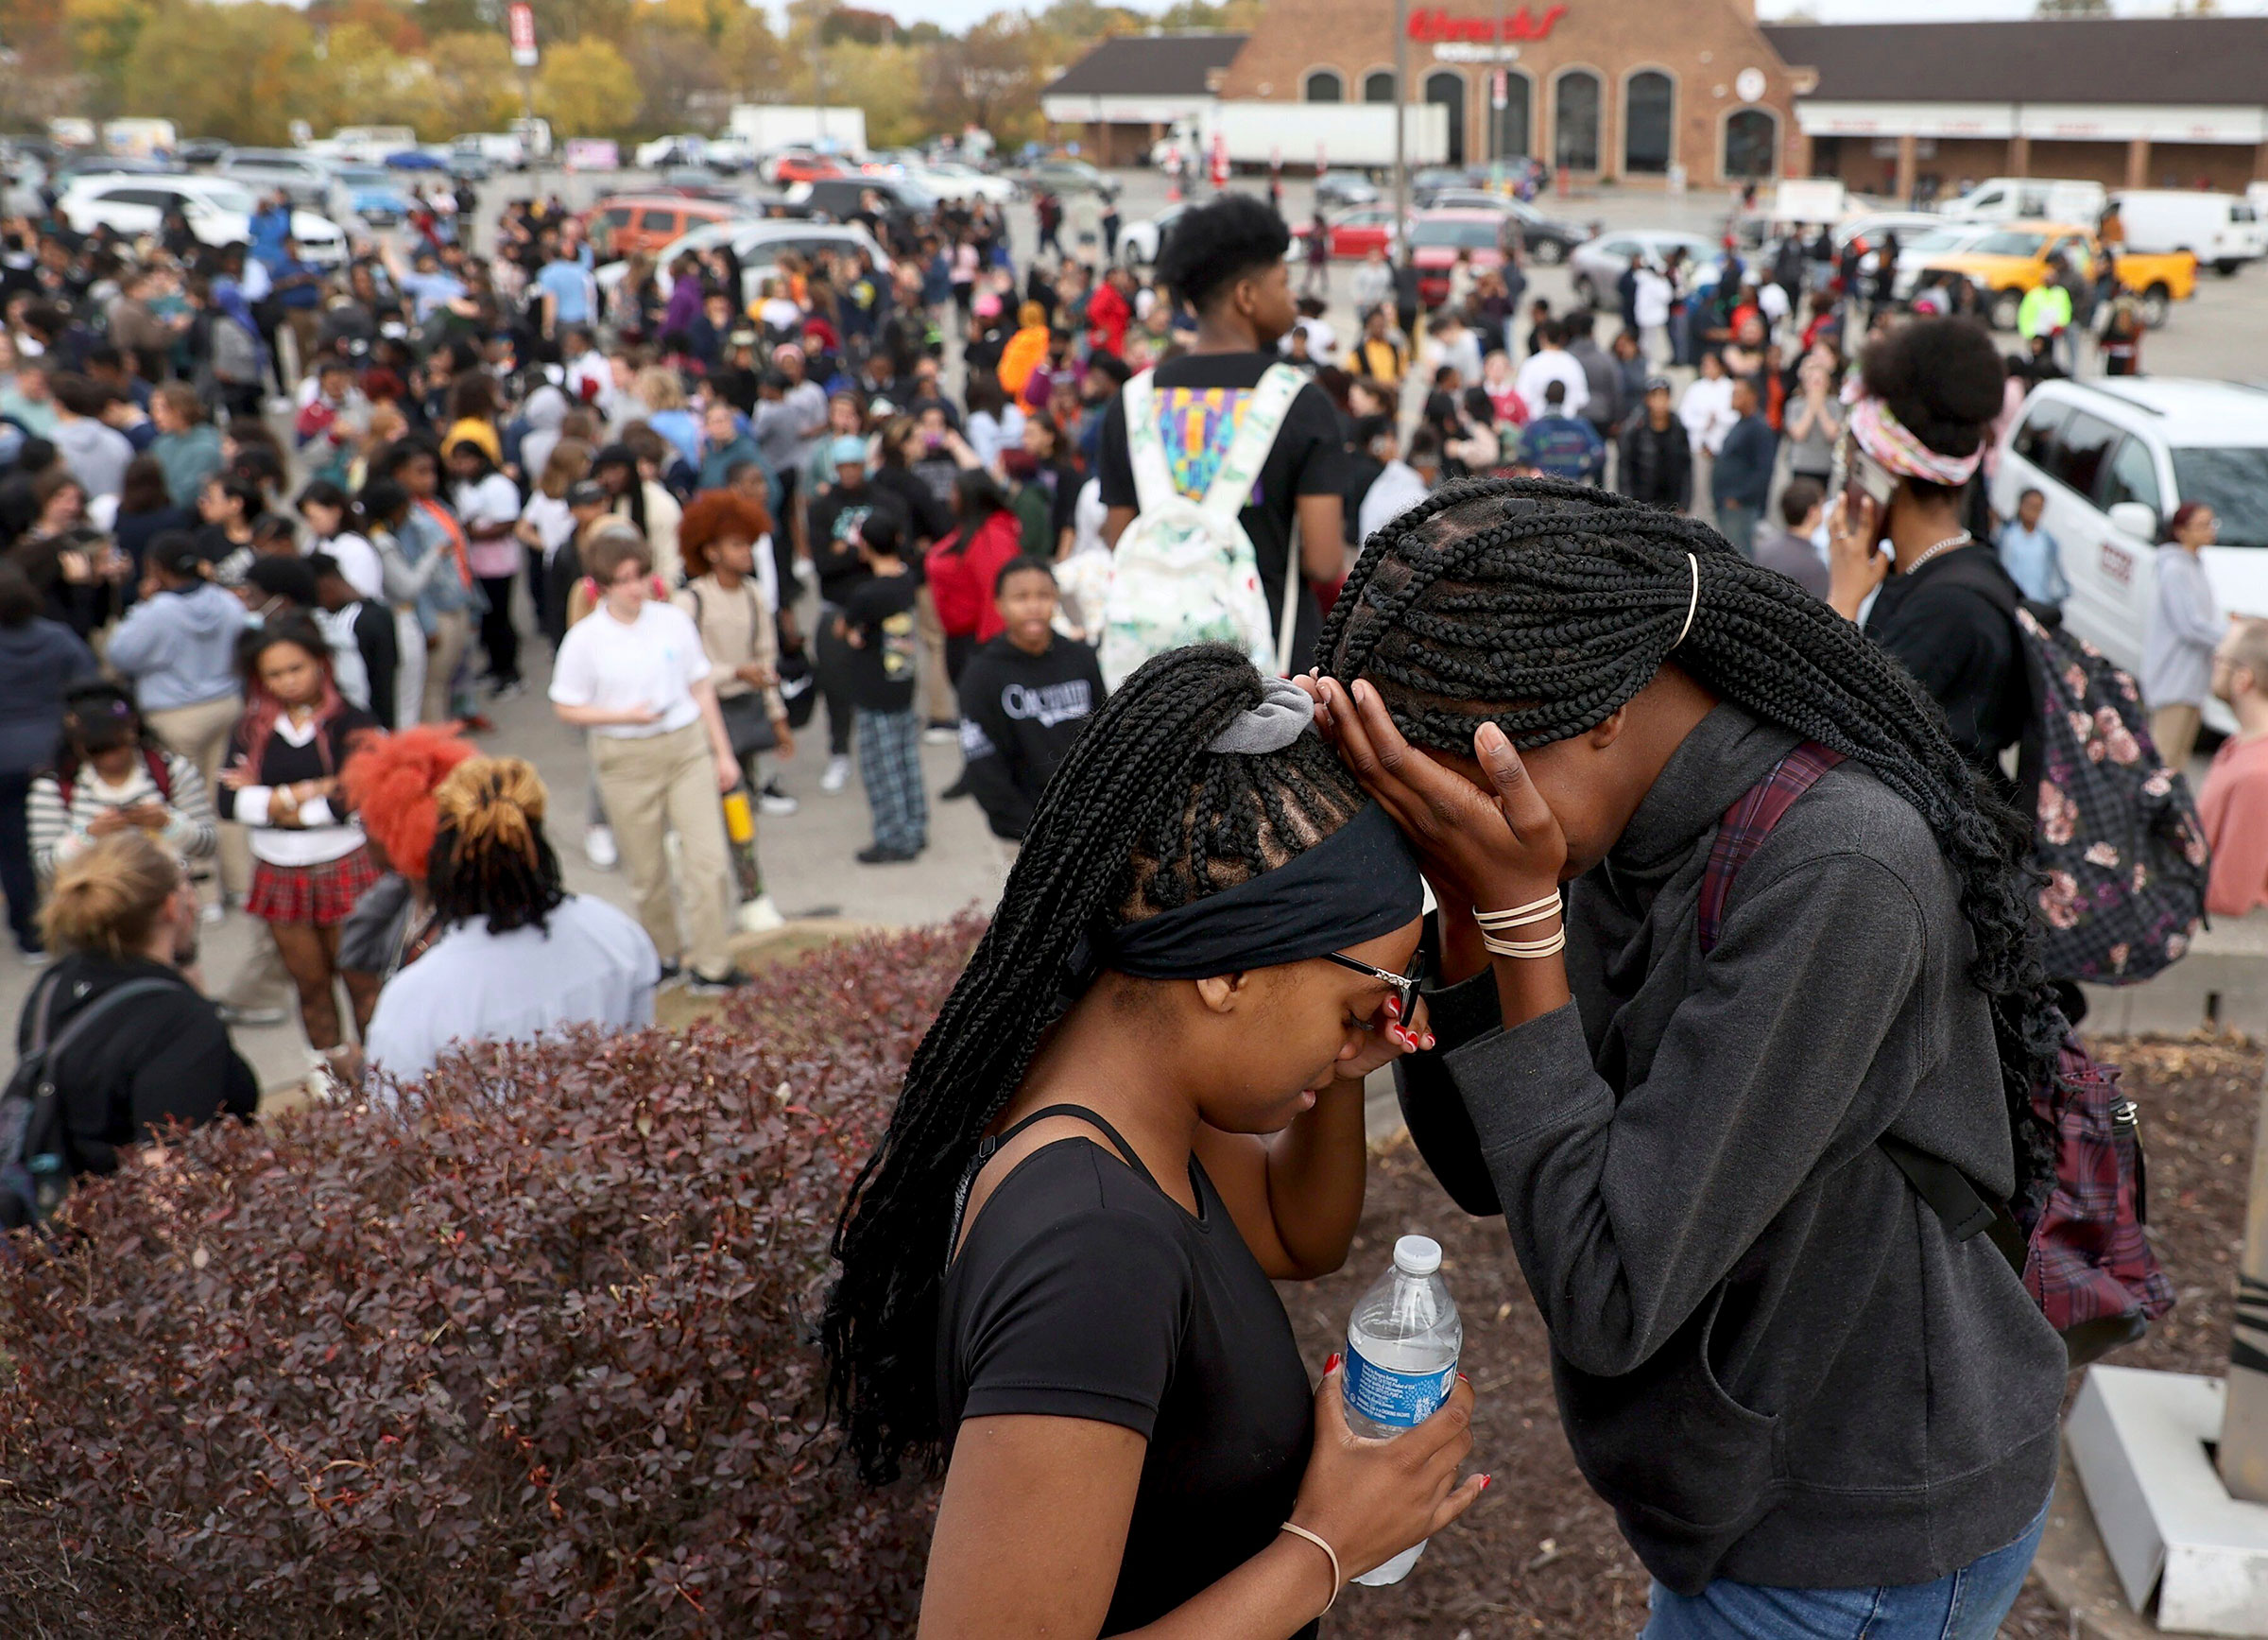 Students stand in a parking lot near the Central Visual and Performing Arts High School after a reported shooting at the school in St. Louis on Oct. 24.